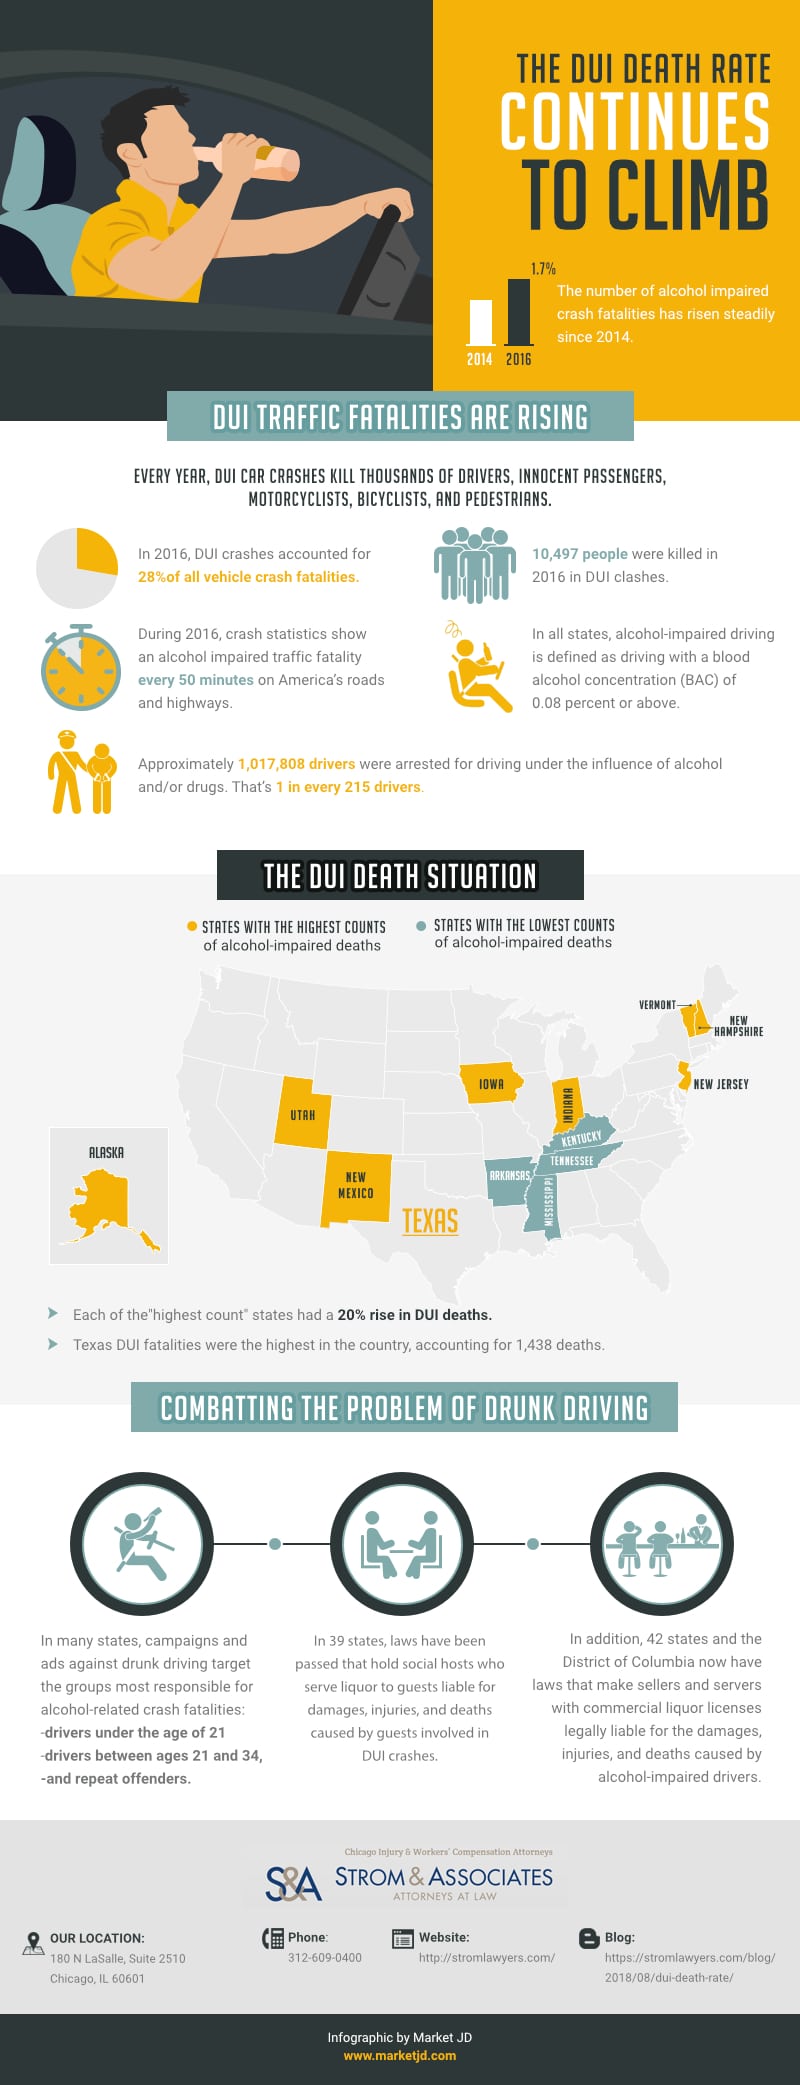 THE DUI DEATH RATE